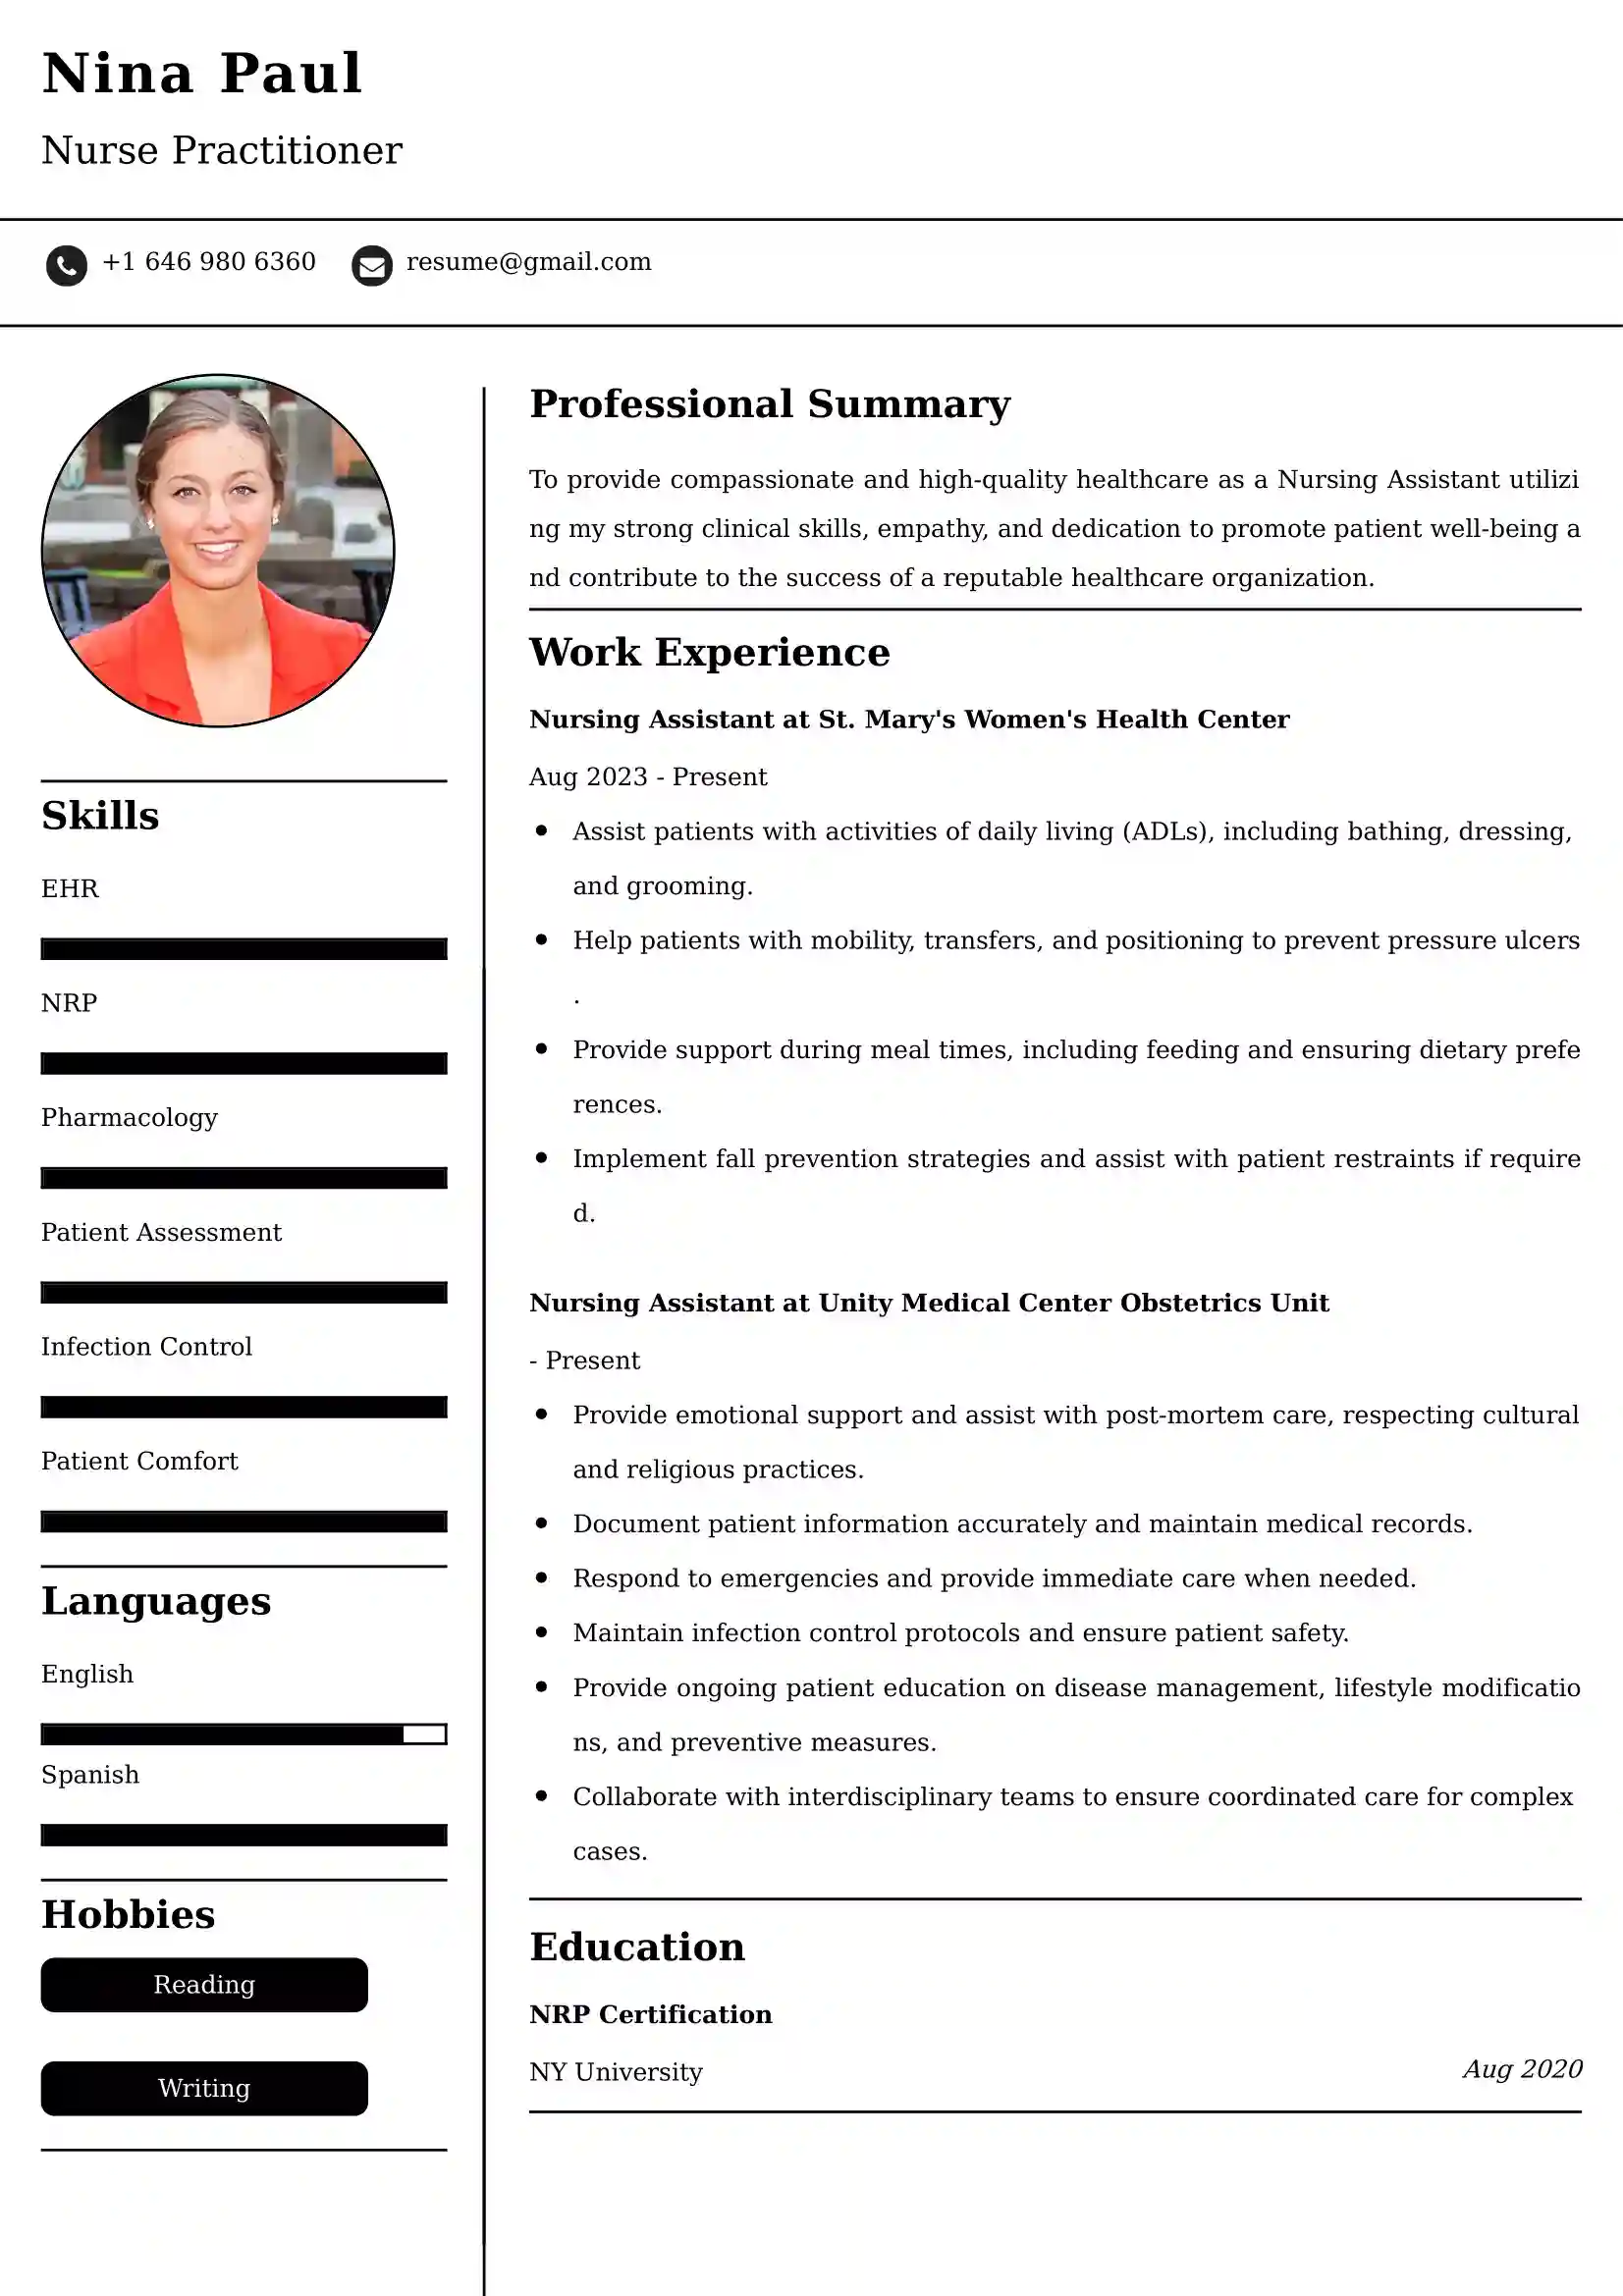 Nursing Assistant Resume Examples - UK Format, Latest Template.